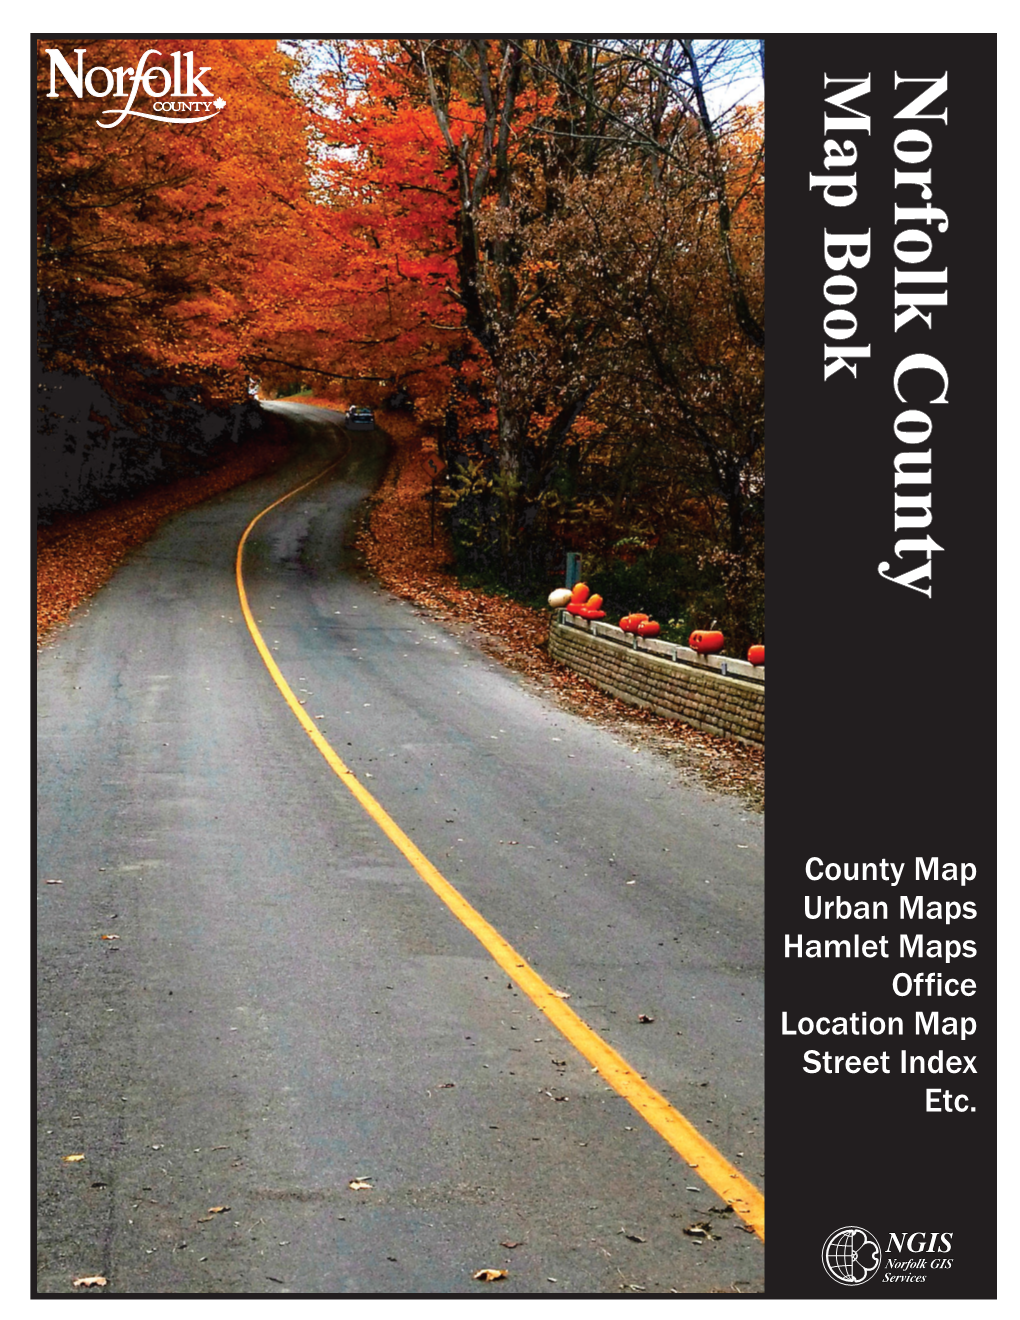 Download the Current Norfolk County Map Guide in PDF Format